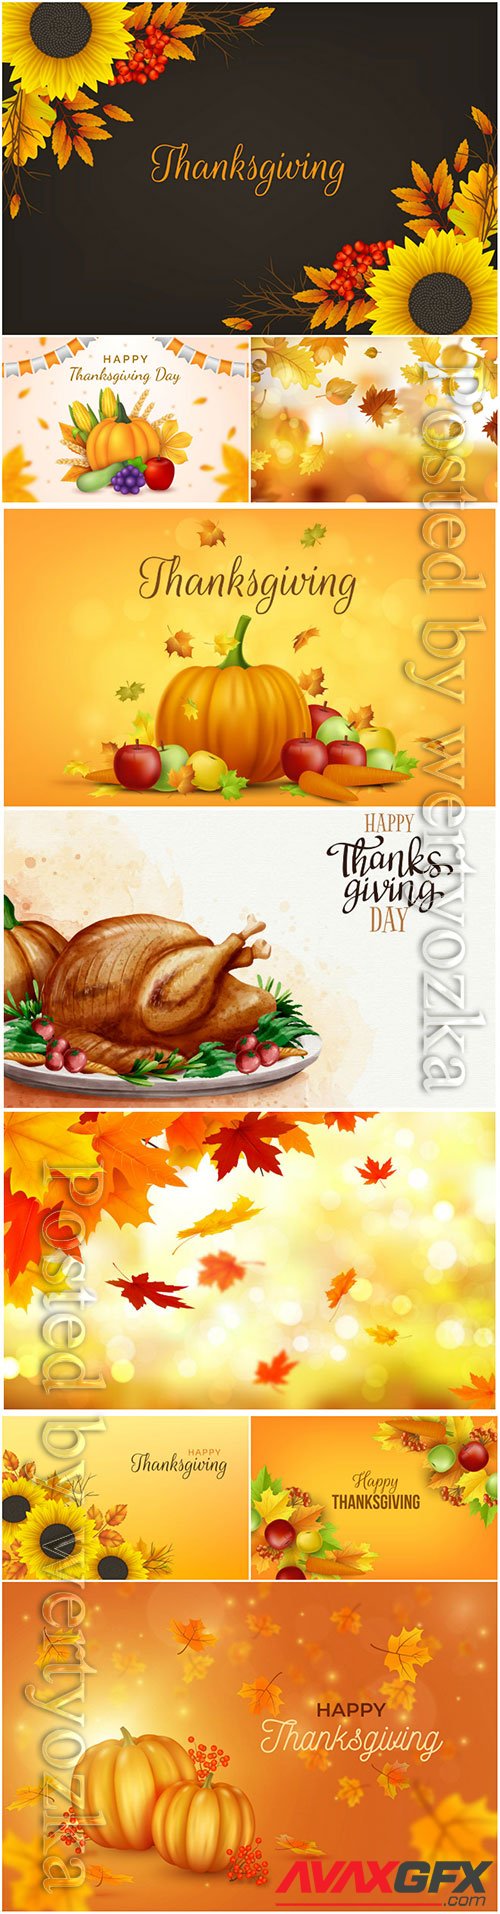 Realistic thanksgiving background